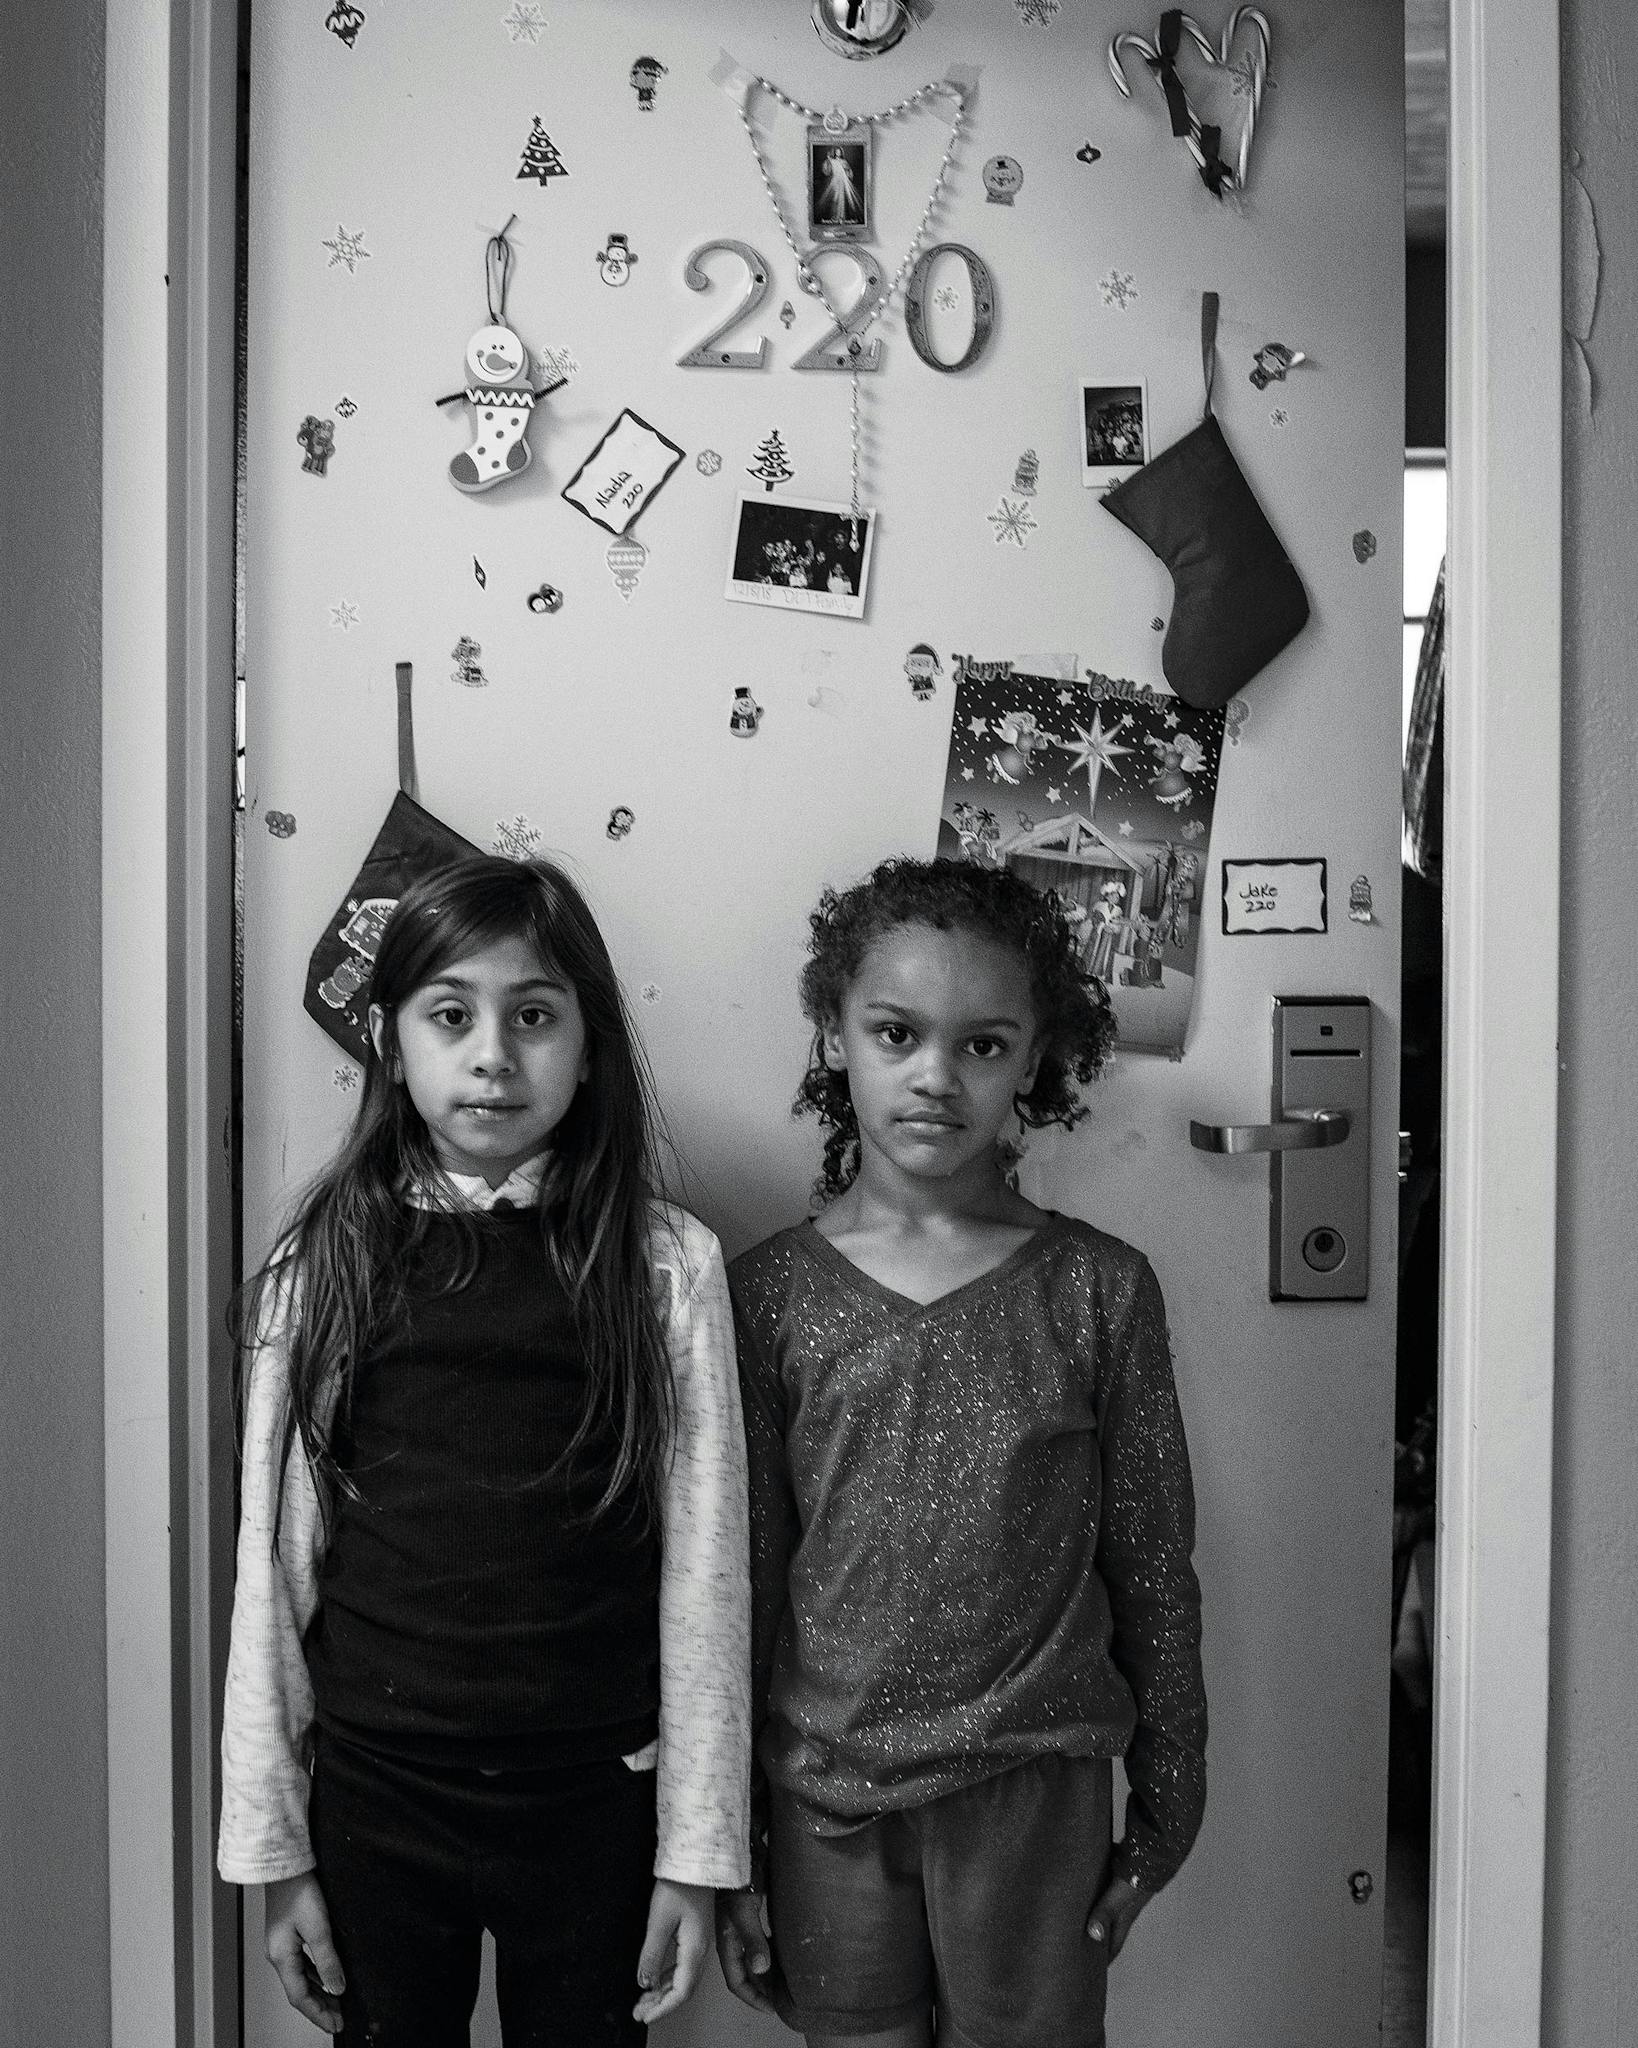 Nadia De La Torre, 9, stands outside her family’s room with her friend Skye Griffin, 8, who lives next door.